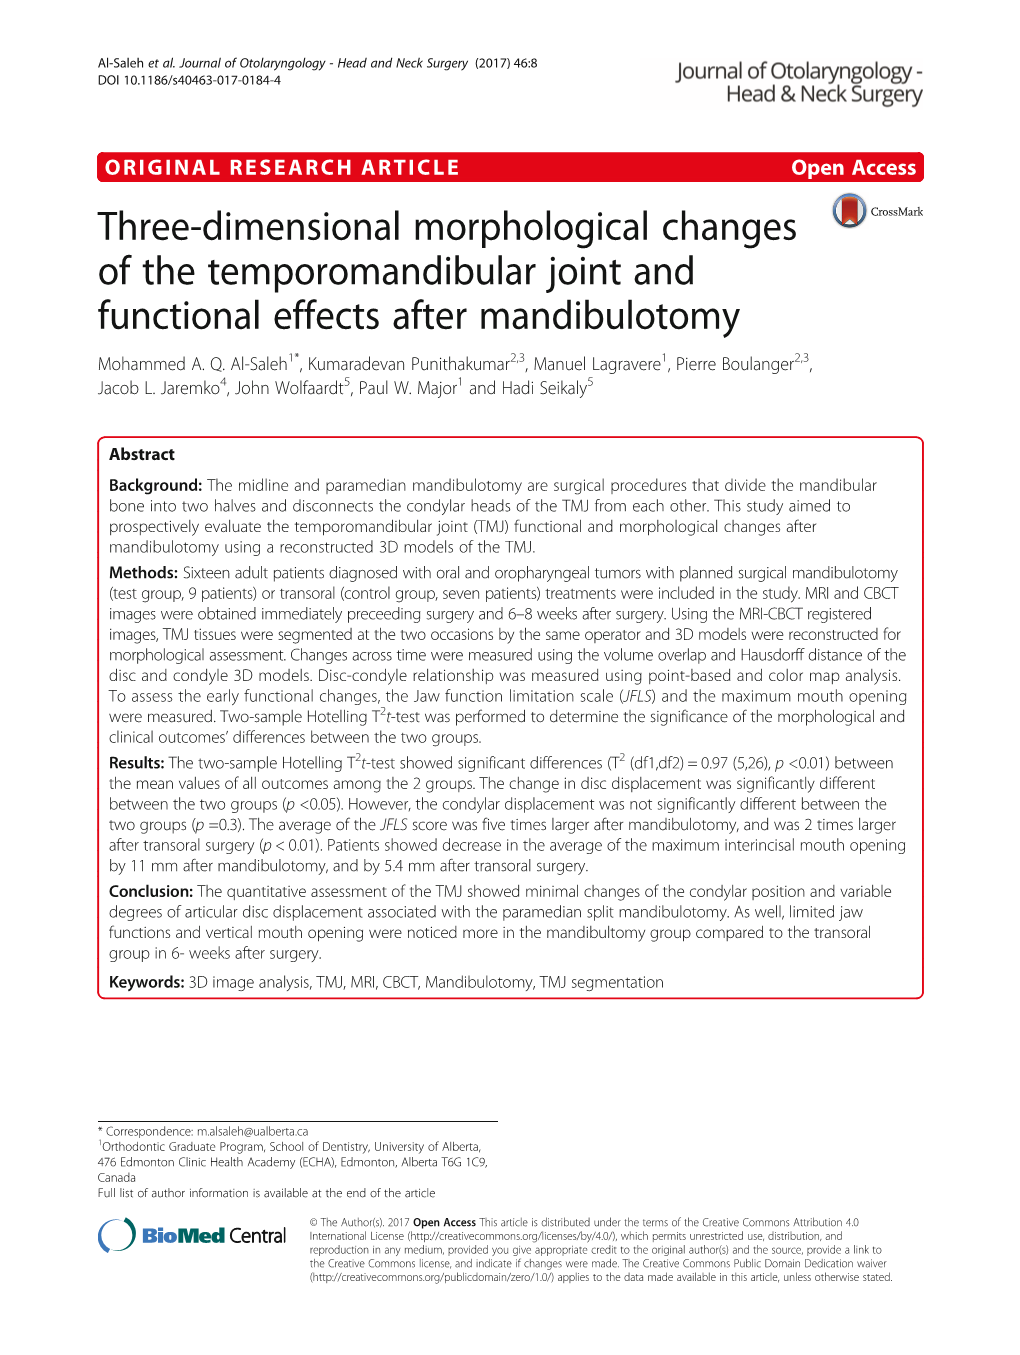 Three-Dimensional Morphological Changes of the Temporomandibular Joint and Functional Effects After Mandibulotomy Mohammed A